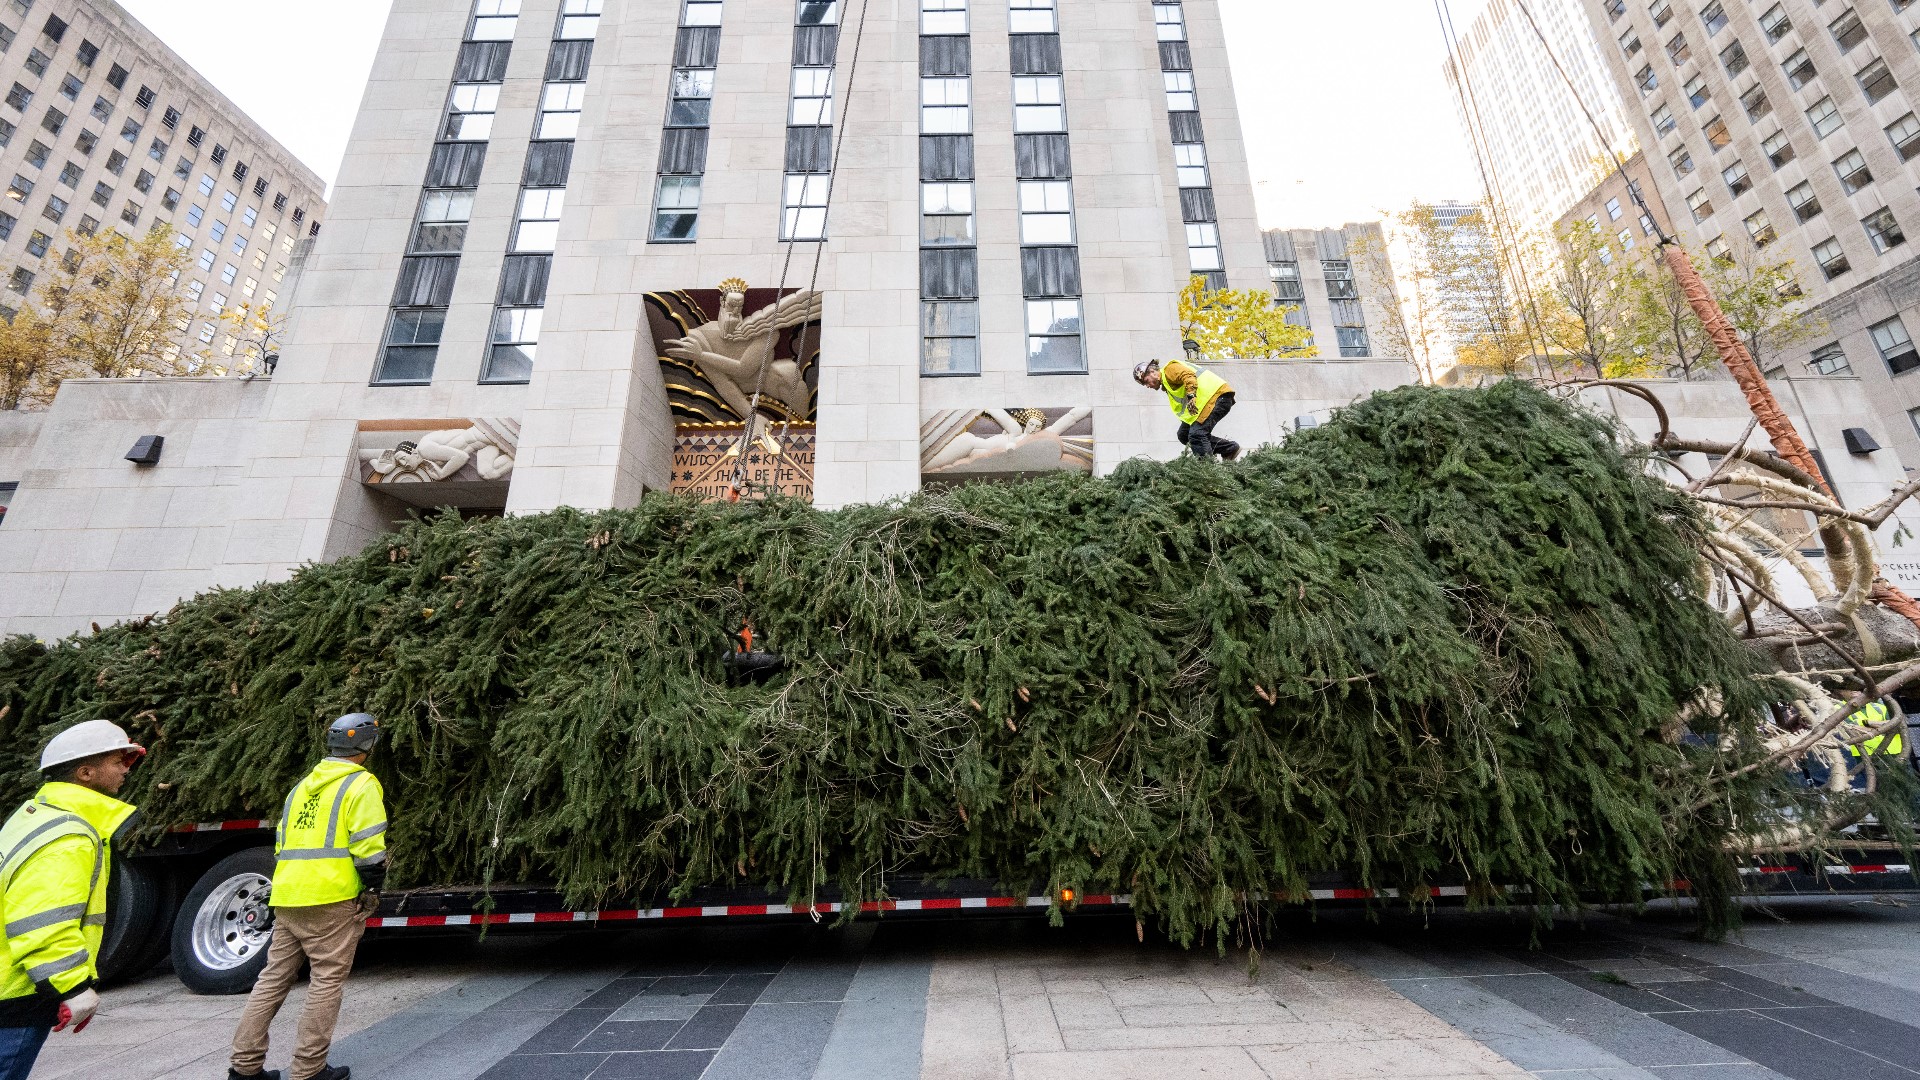 Hailing from Vestal, New York, the tree stands 80 feet tall and weighs about 12 tons.